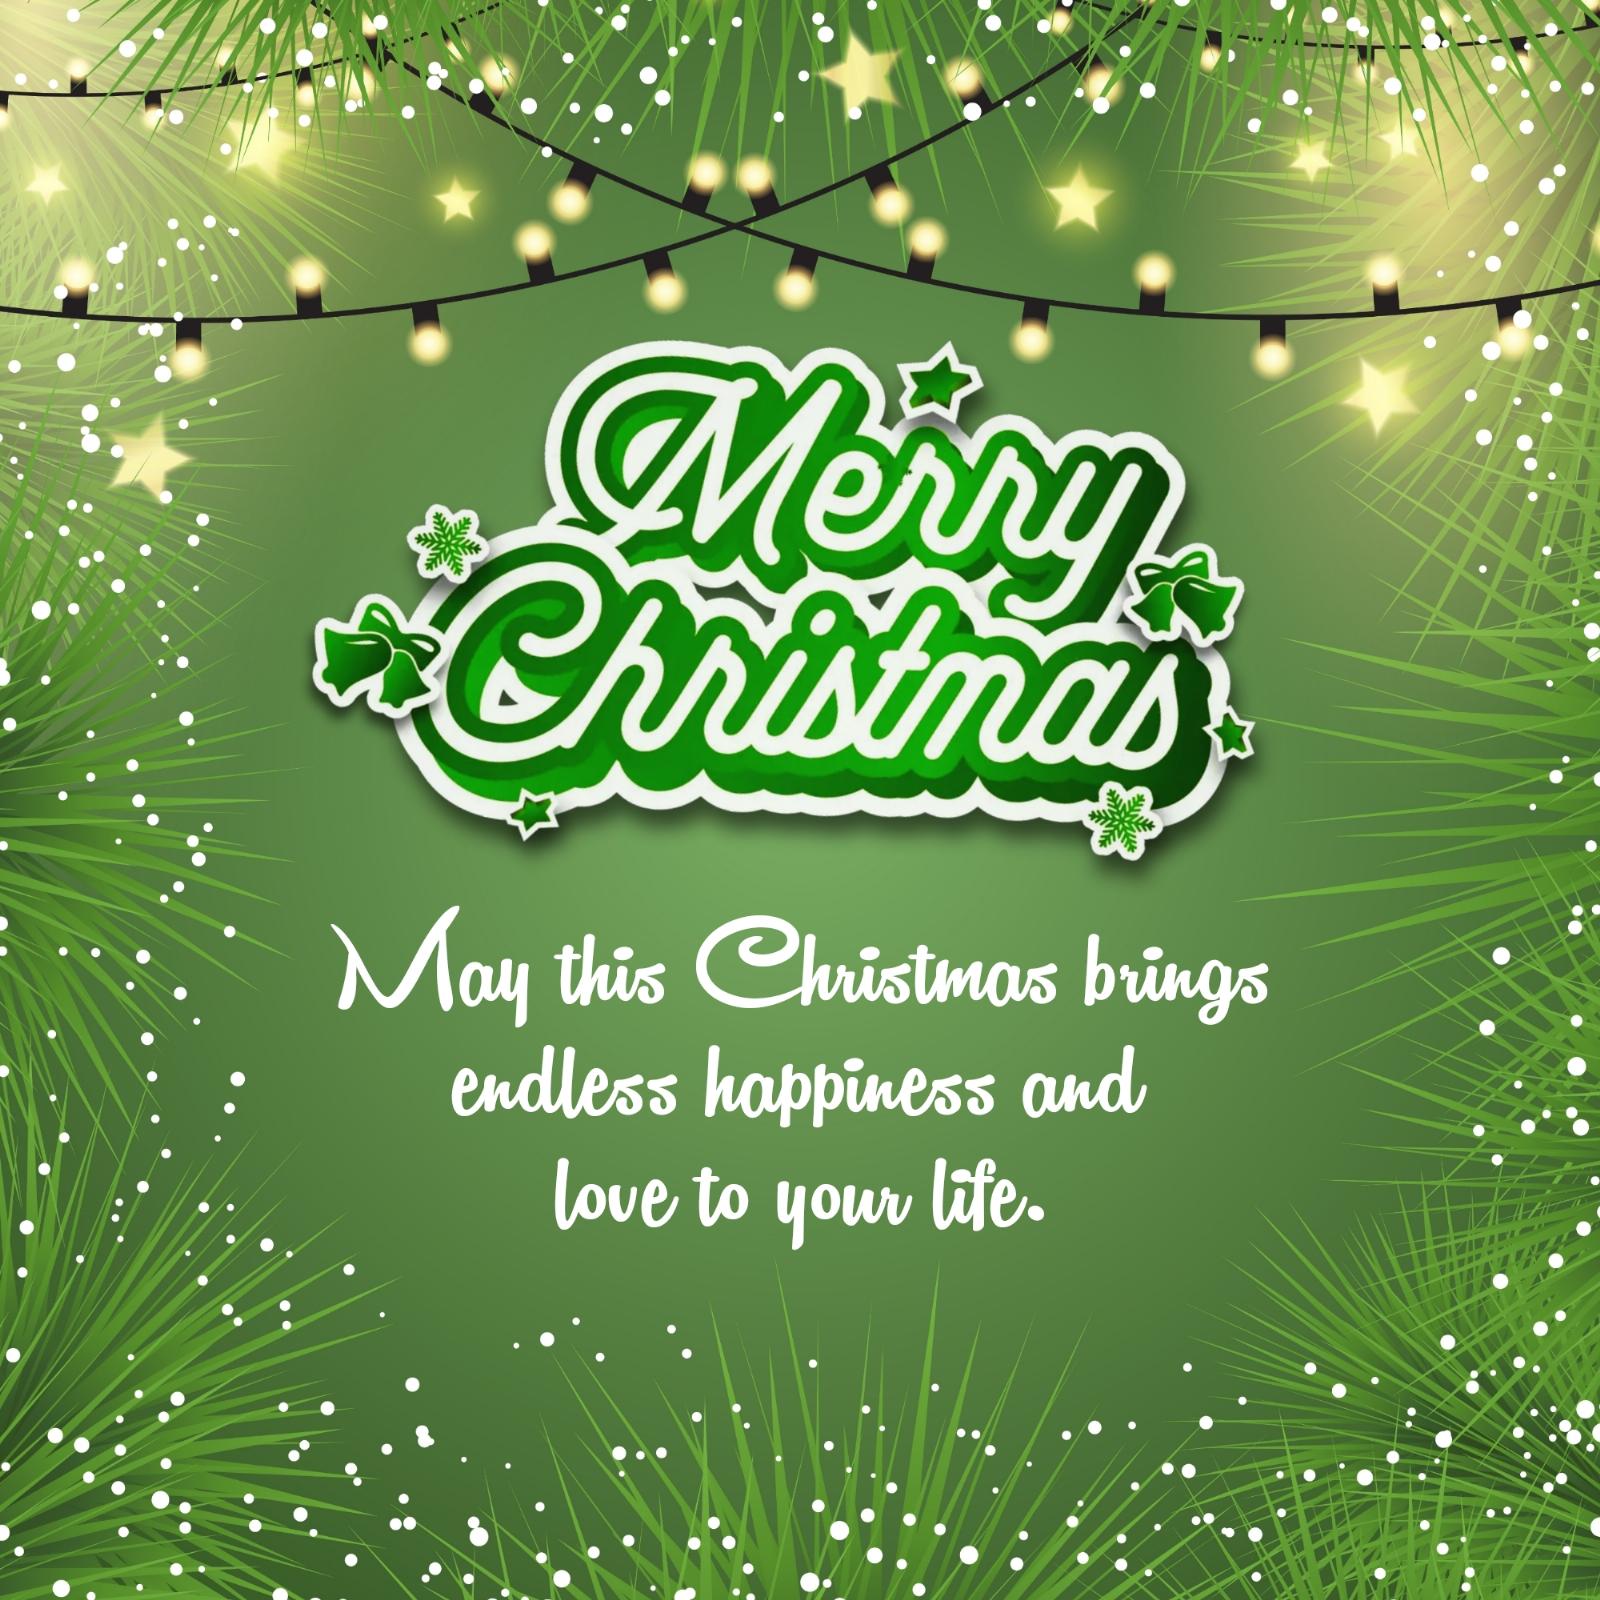 May this Christmas brings endless happiness and love